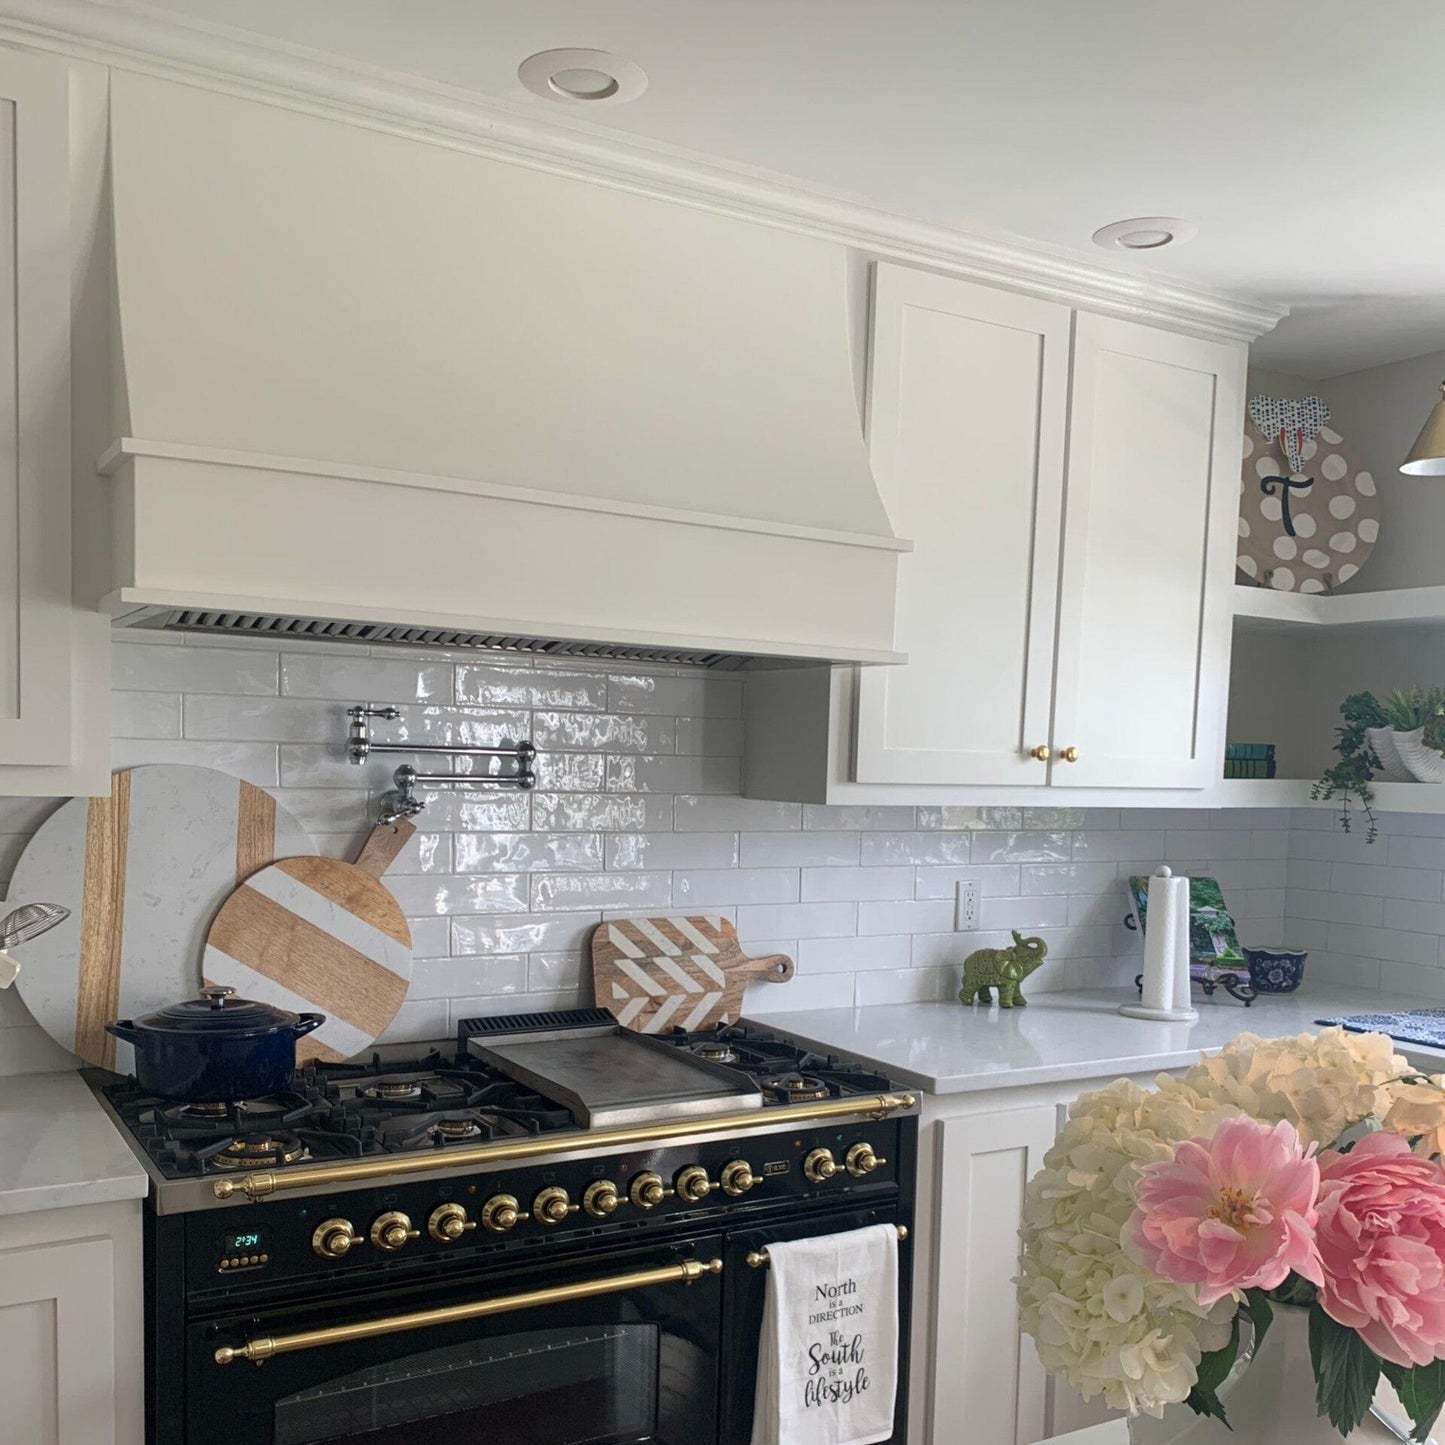 Riley & Higgs White Wood Range Hood With Sloped Front and Decorative Trim - 30", 36", 42", 48", 54" and 60" Widths Available